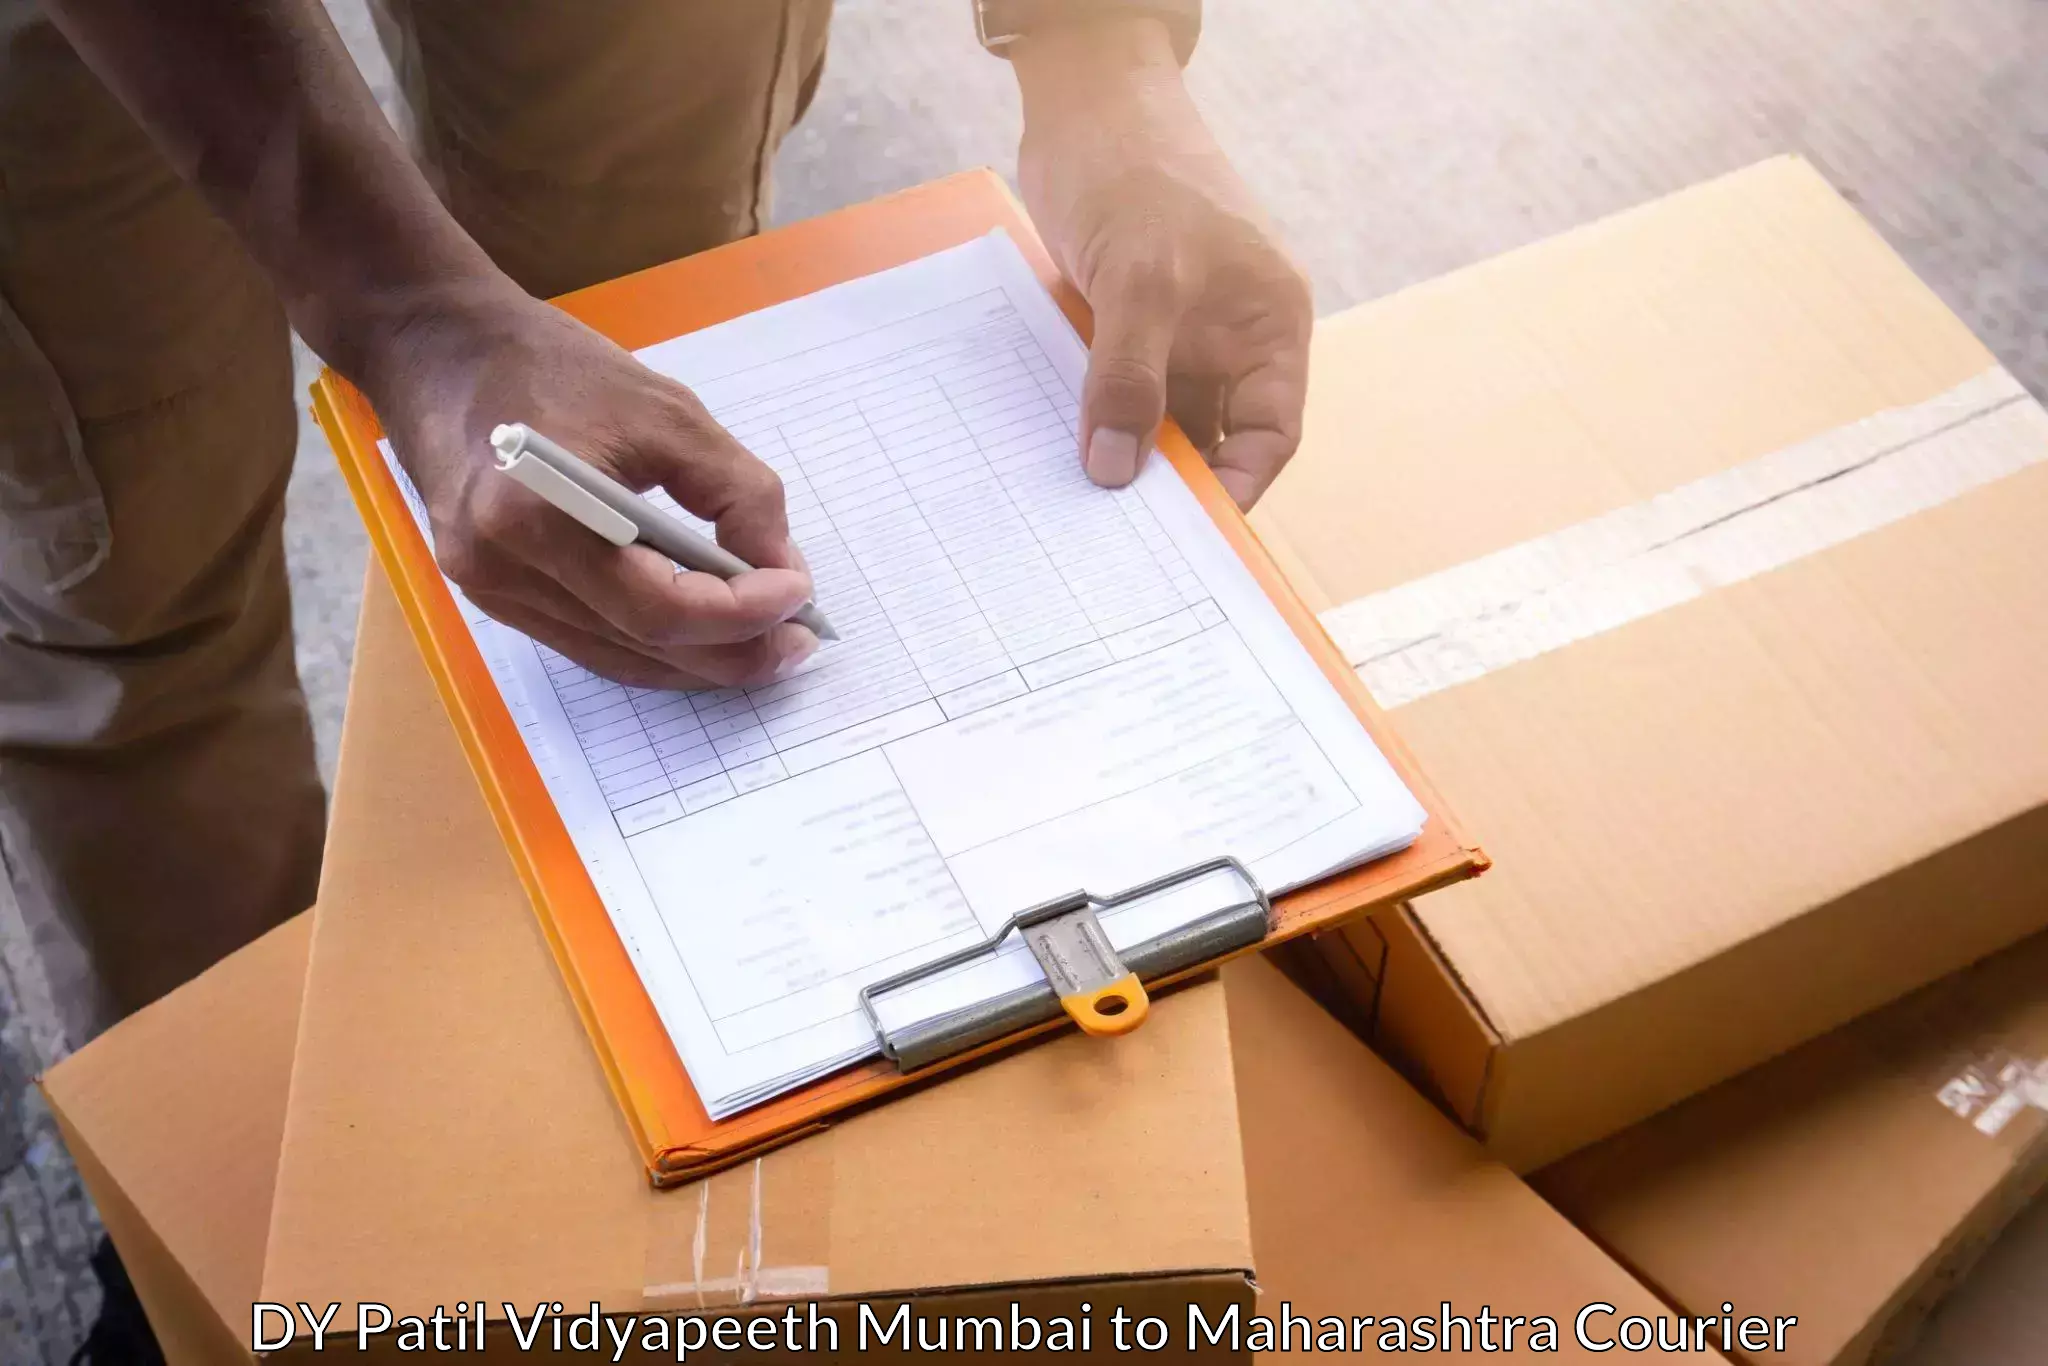 Next-day freight services DY Patil Vidyapeeth Mumbai to Mul